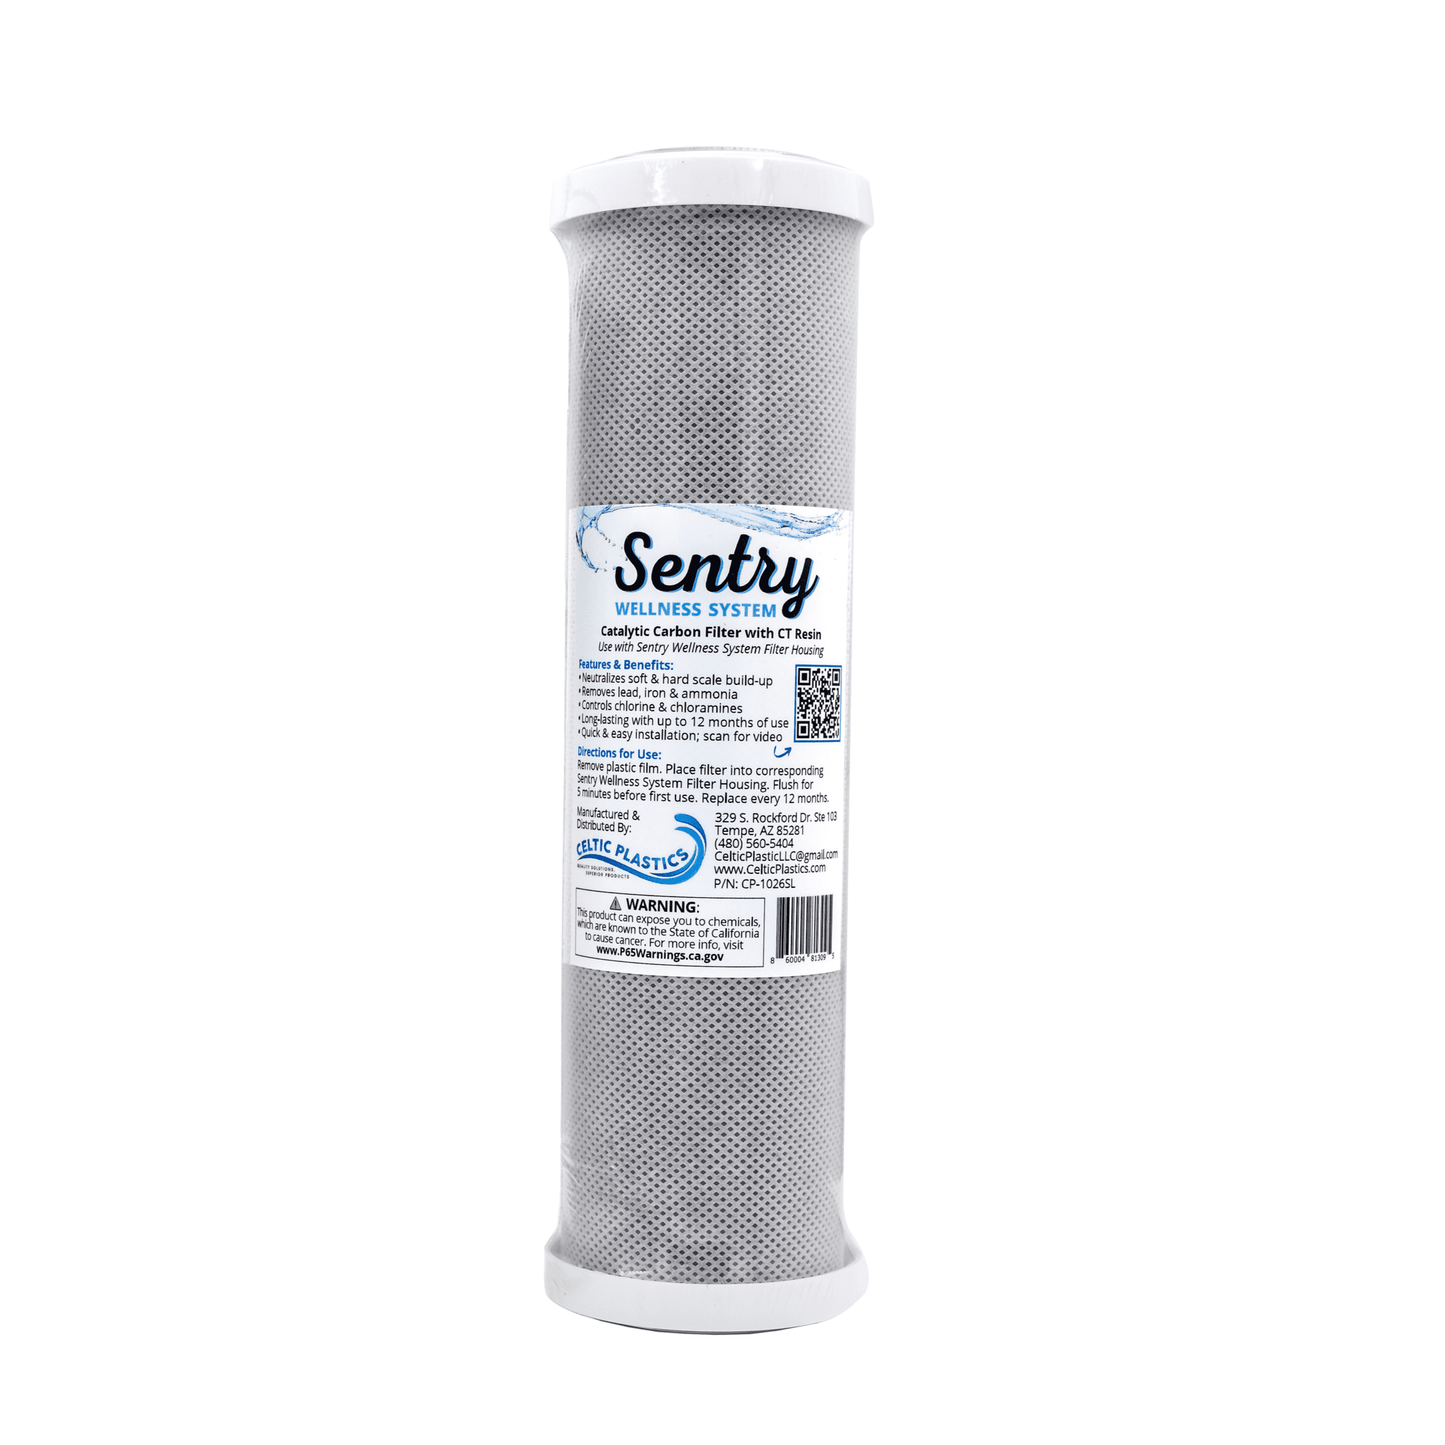 Sentry Wellness System - Catalytic Carbon Filter